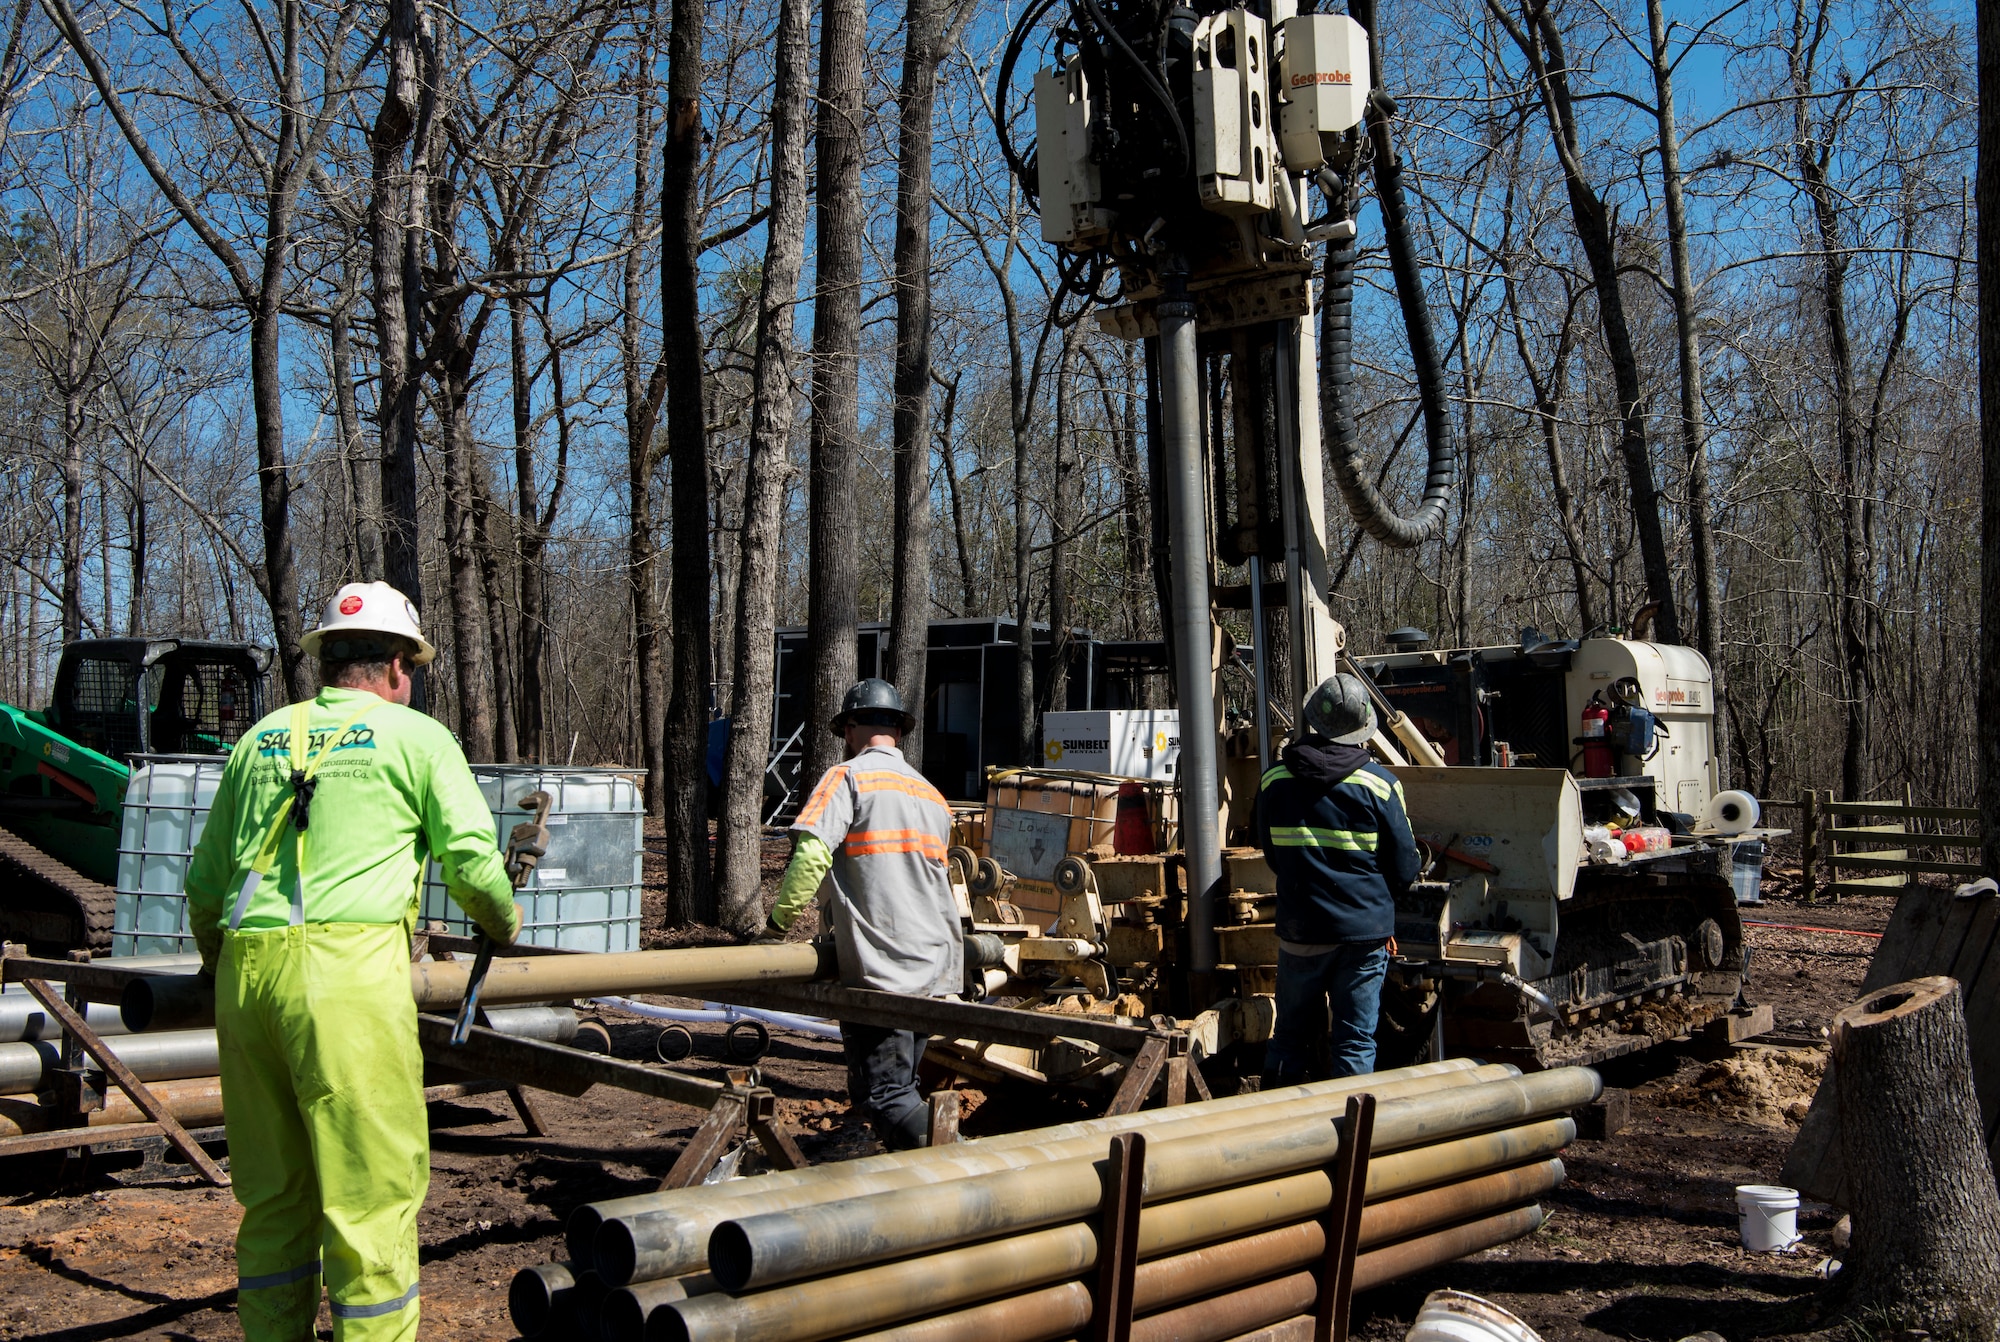 South Atlantic Environmental Drilling and Construction Company workers drill into the ground to insert a BOS 100® Treatment Barrier at Sans Souci Farm in Sumter, S.C., March 7, 2019.